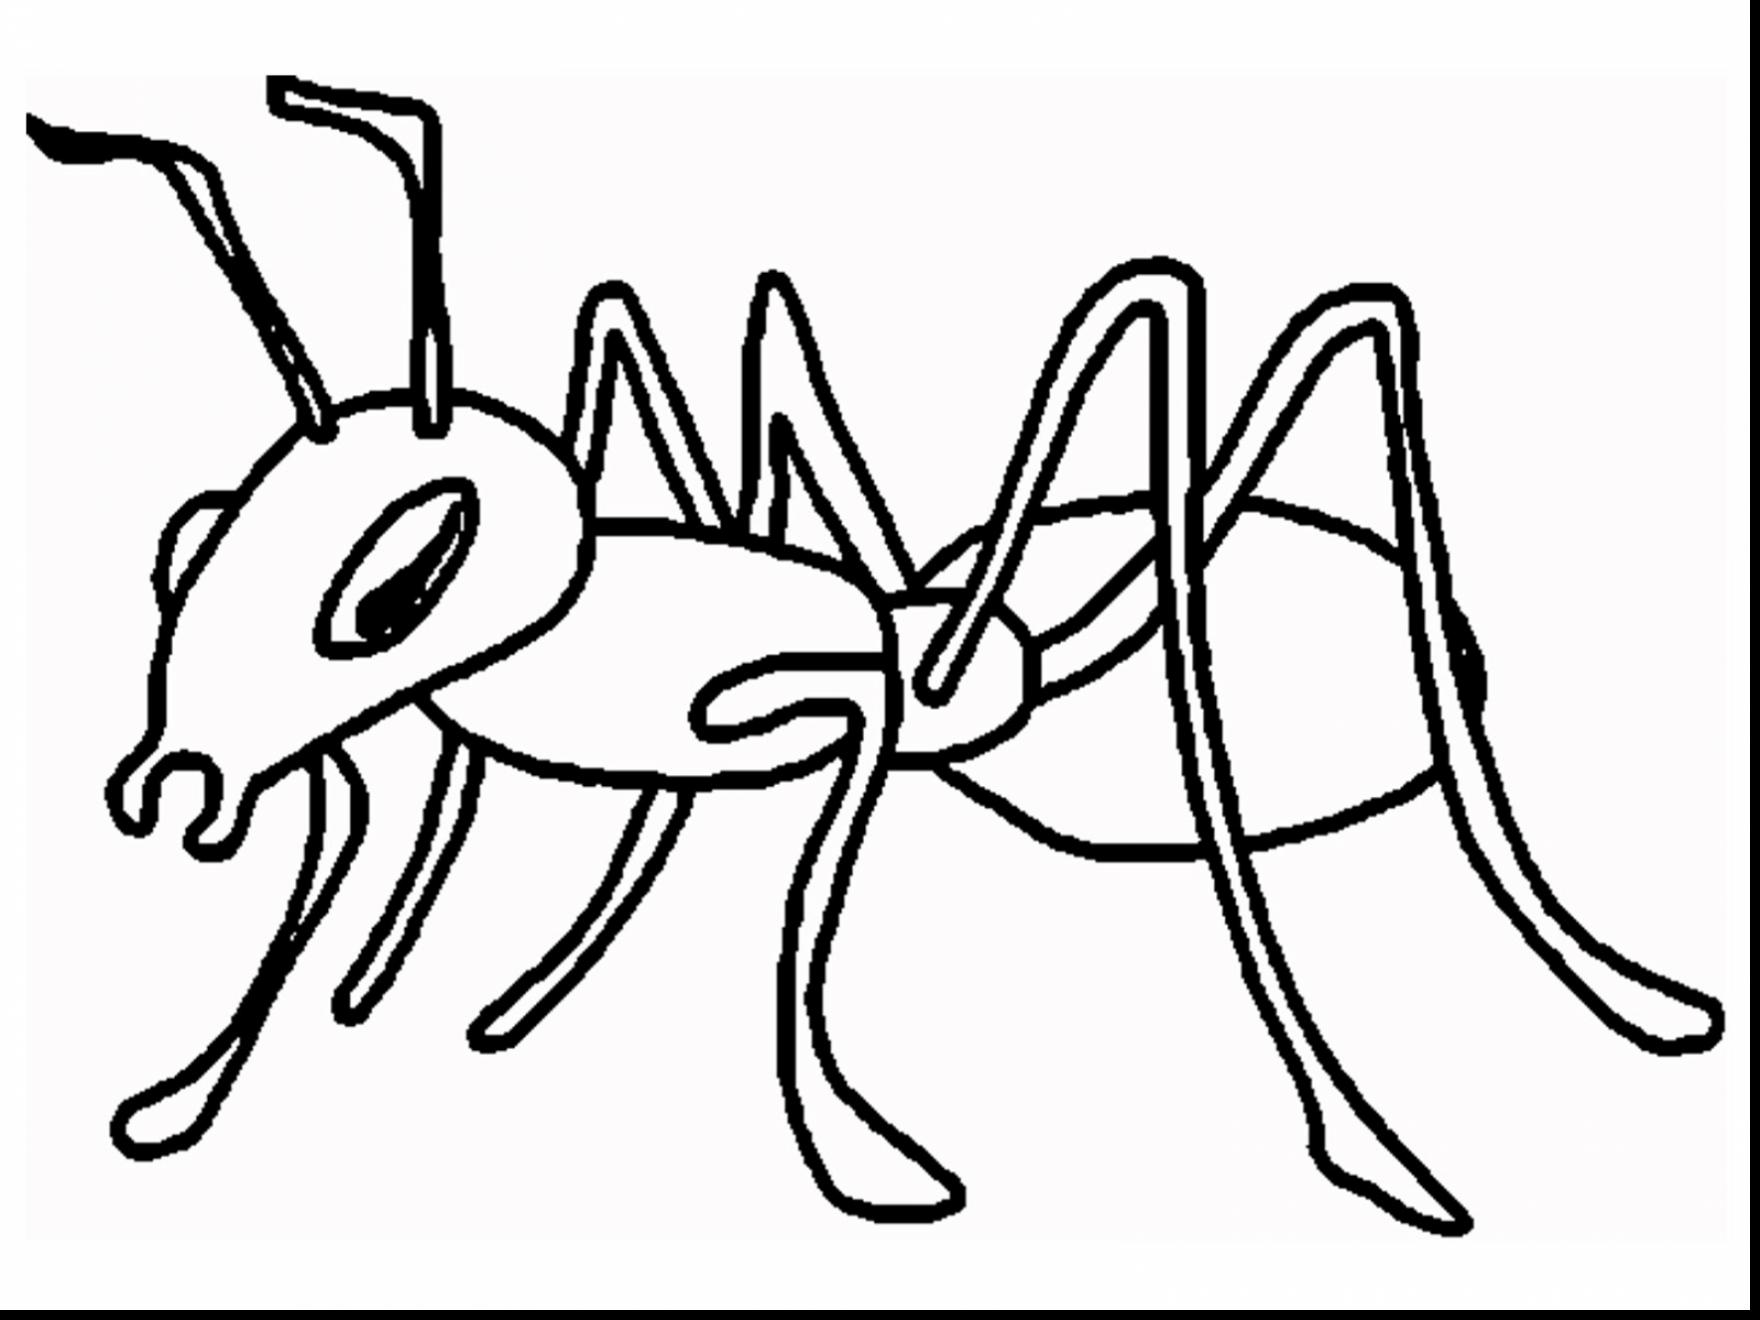 Ant coloring #13, Download drawings